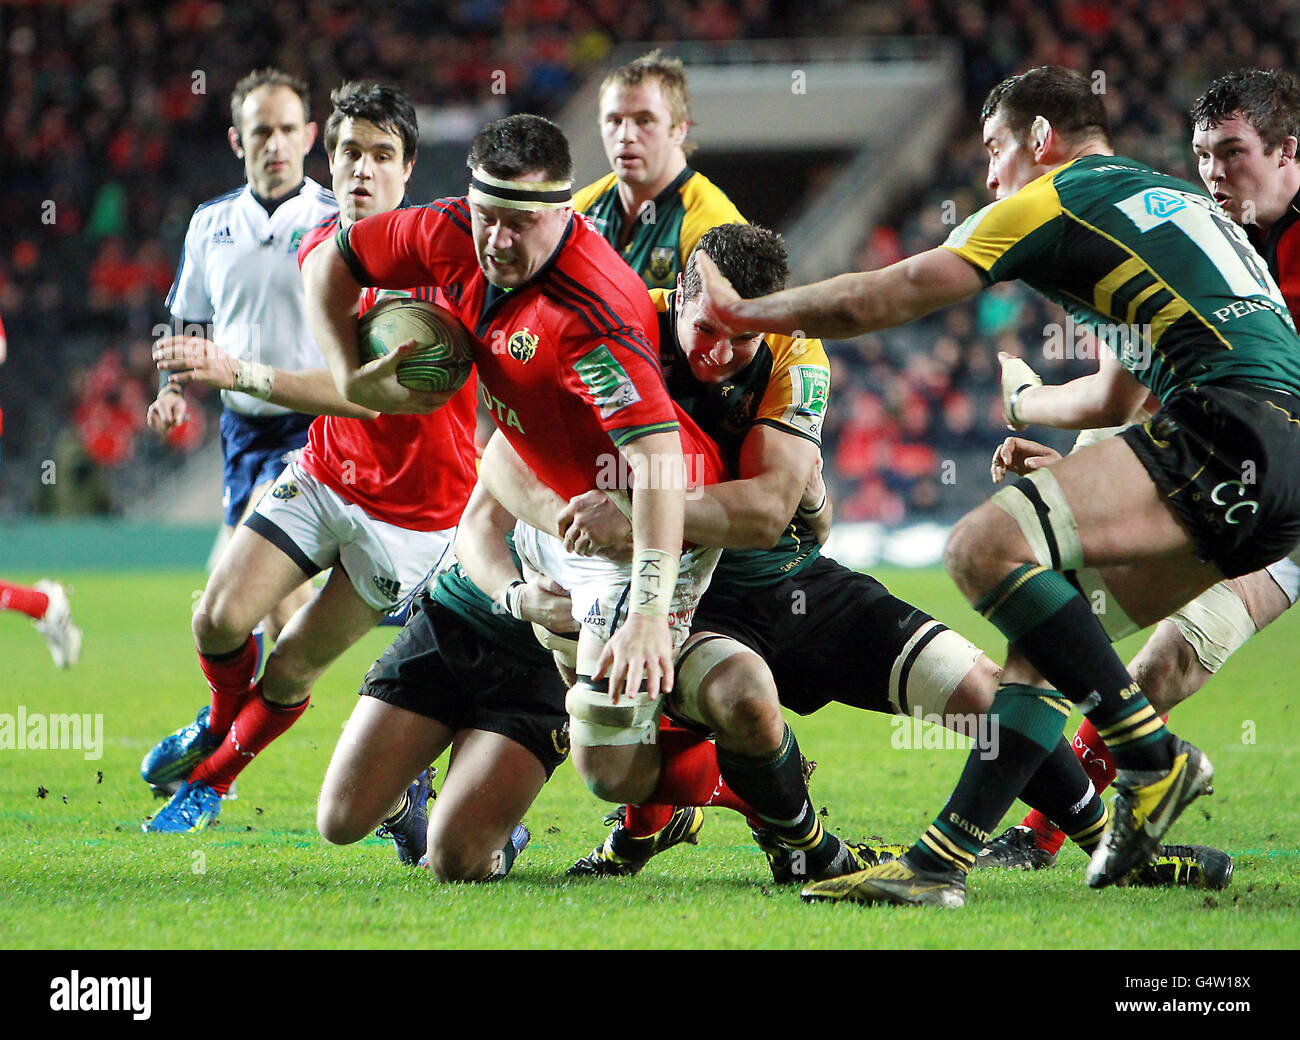 Rugby Union - Heineken Cup - Pool 1 - Northampton Saints v Munster Rugby - stadium:mk. Munster's James Coughlan is tackled by Northampton Saints' Phil Dowson during the Heineken Cup Pool One match at Stadium MK, Milton Keynes. Stock Photo